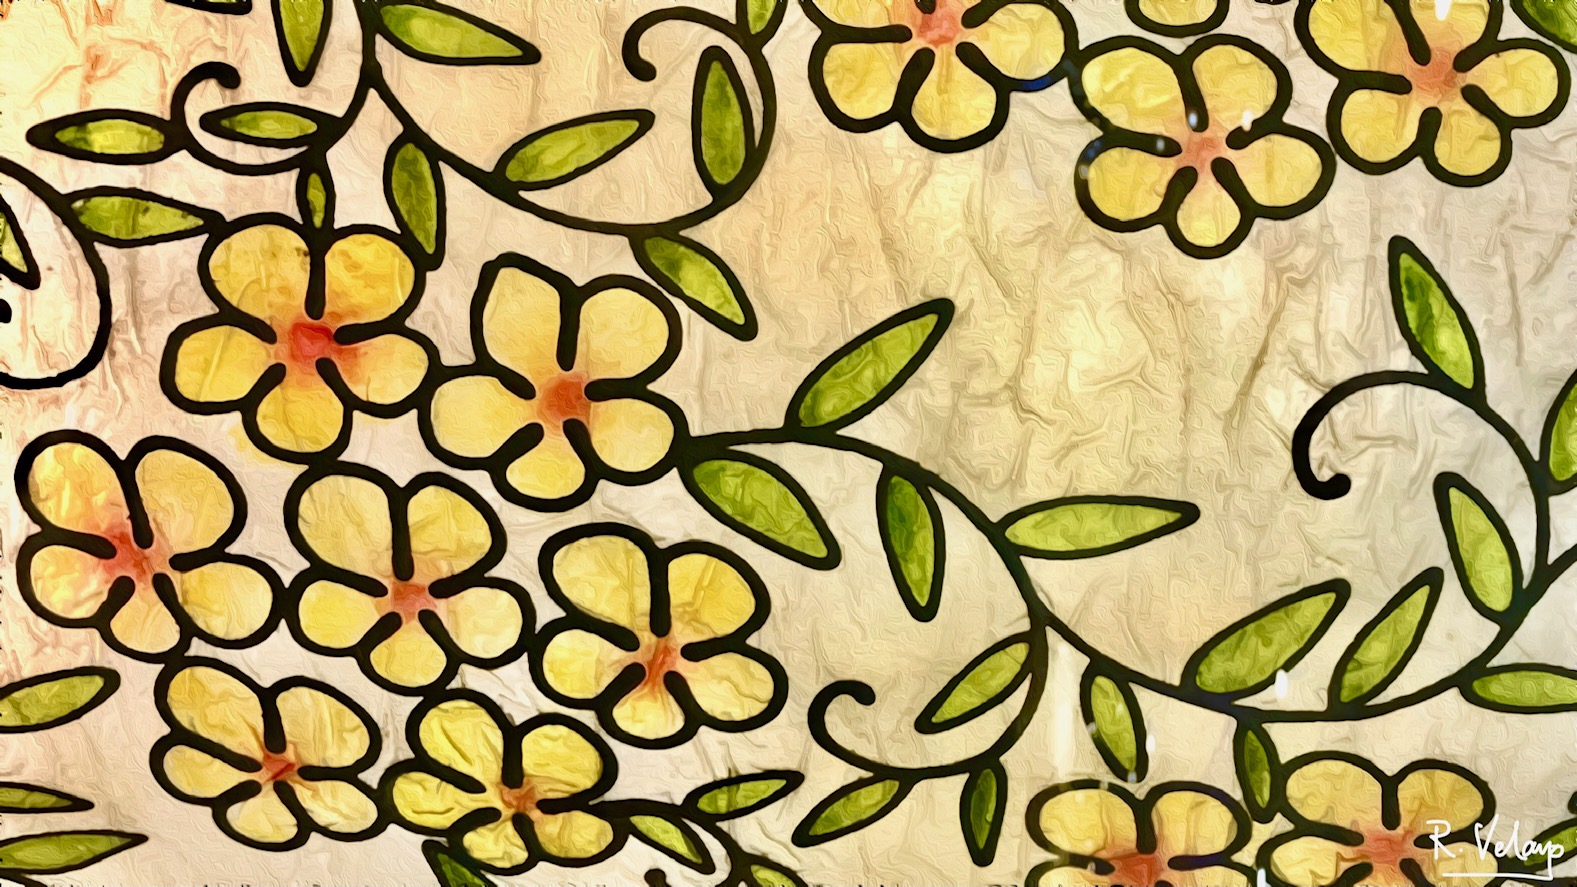 "FLORAL PATTERN ON CAPIZ SHELL LAMP SHADE" [Created: 11/25/2021]